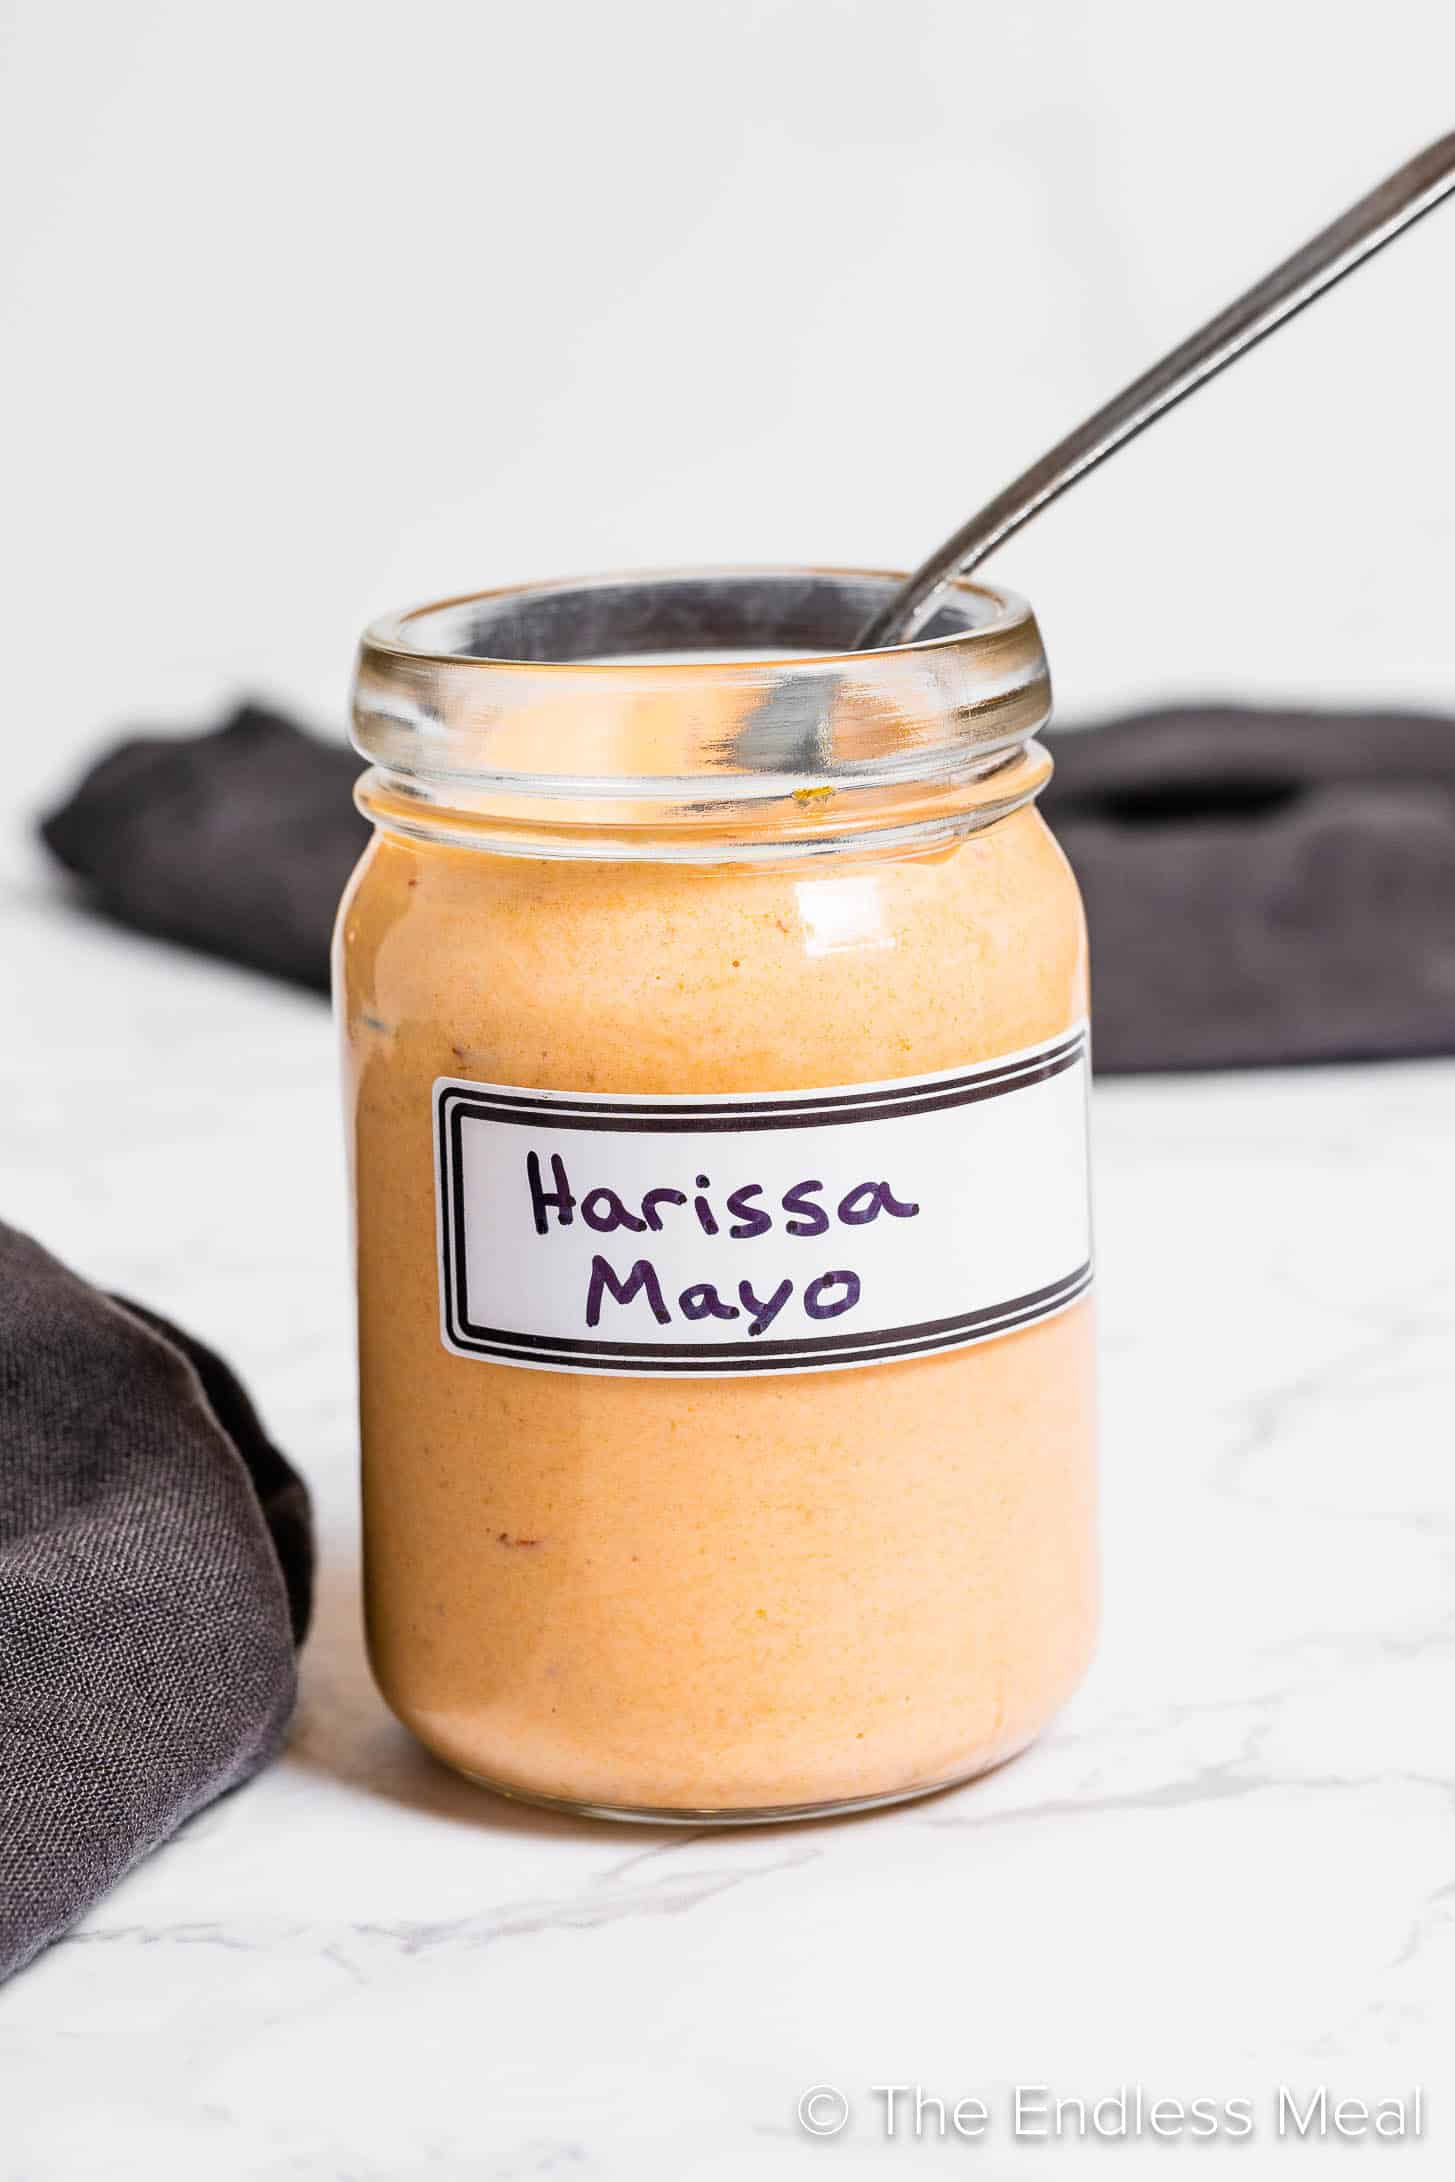 Harissa Mayo in a glass jar with a spoon